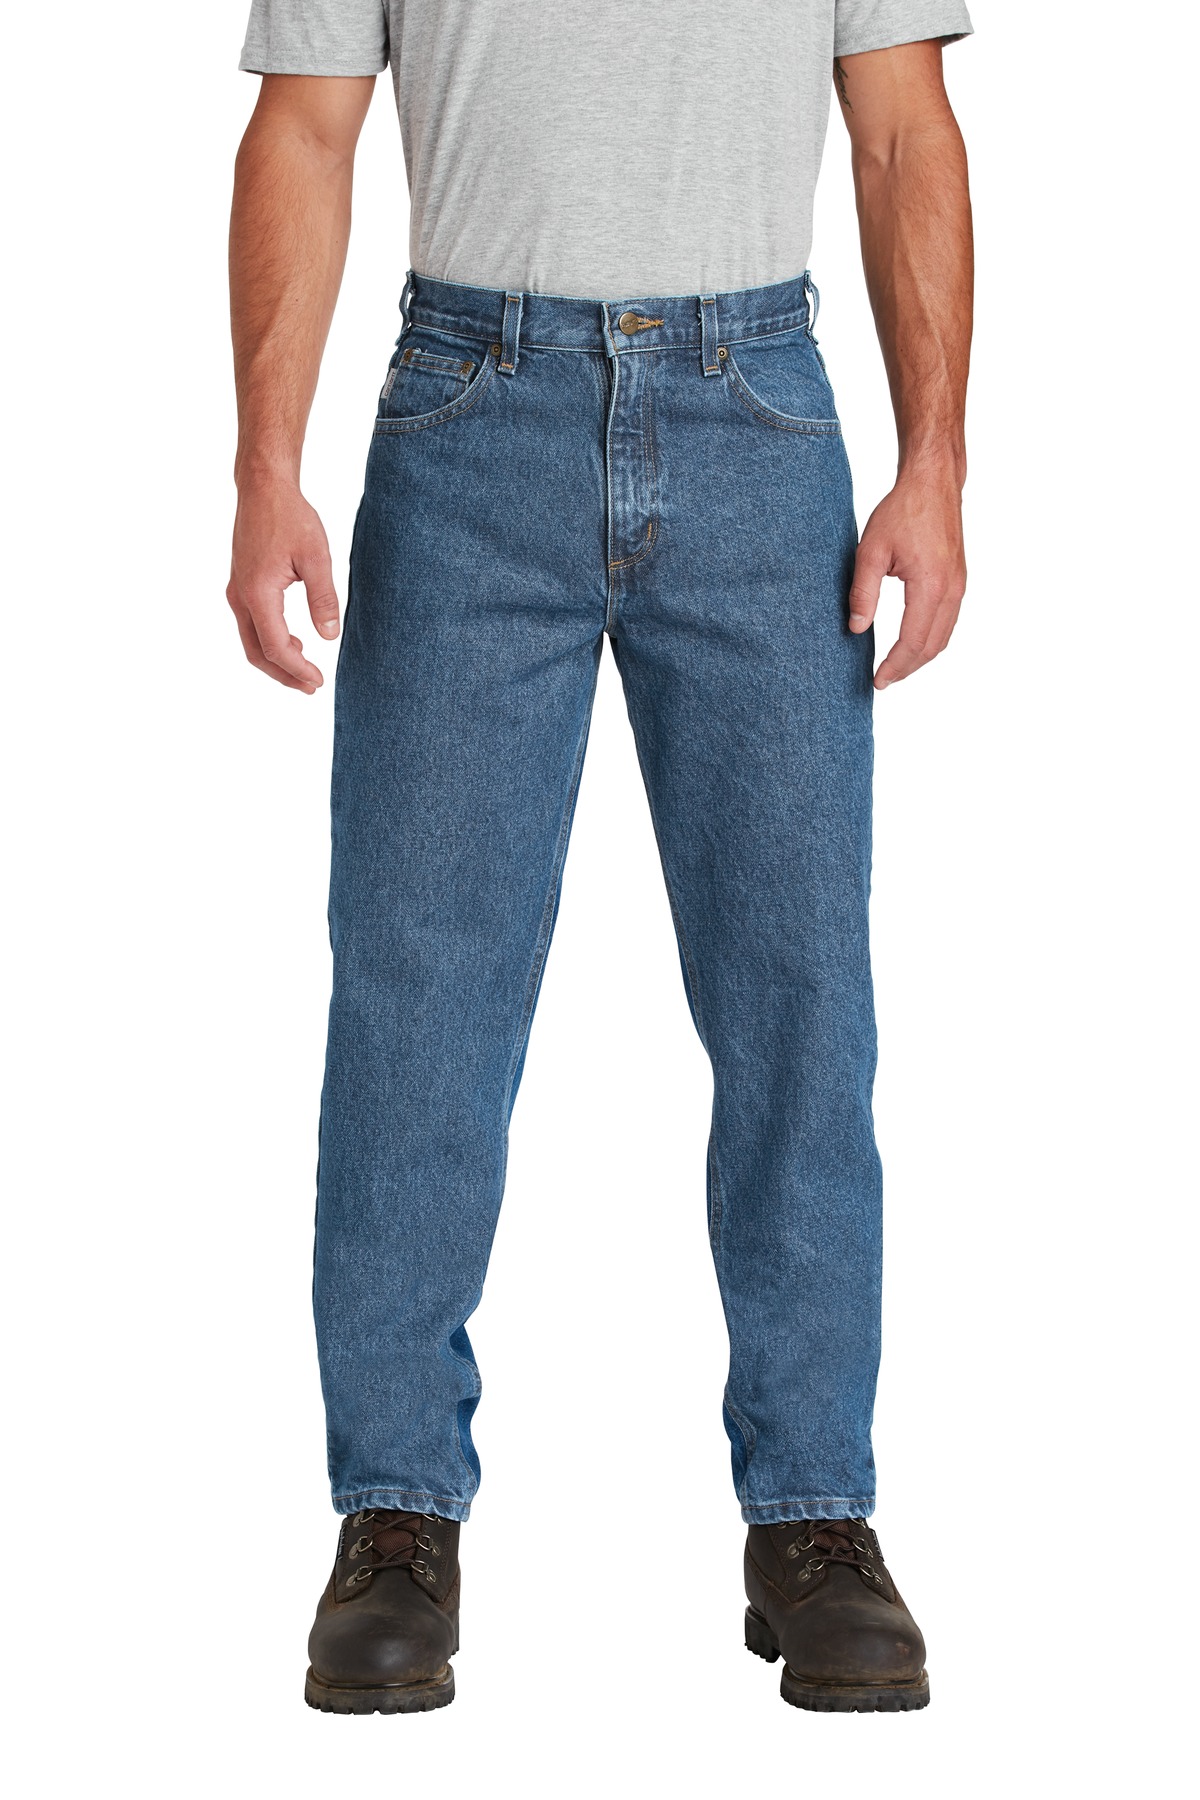 Carhartt  Relaxed-Fit Tapered-Leg Jean . CTB17